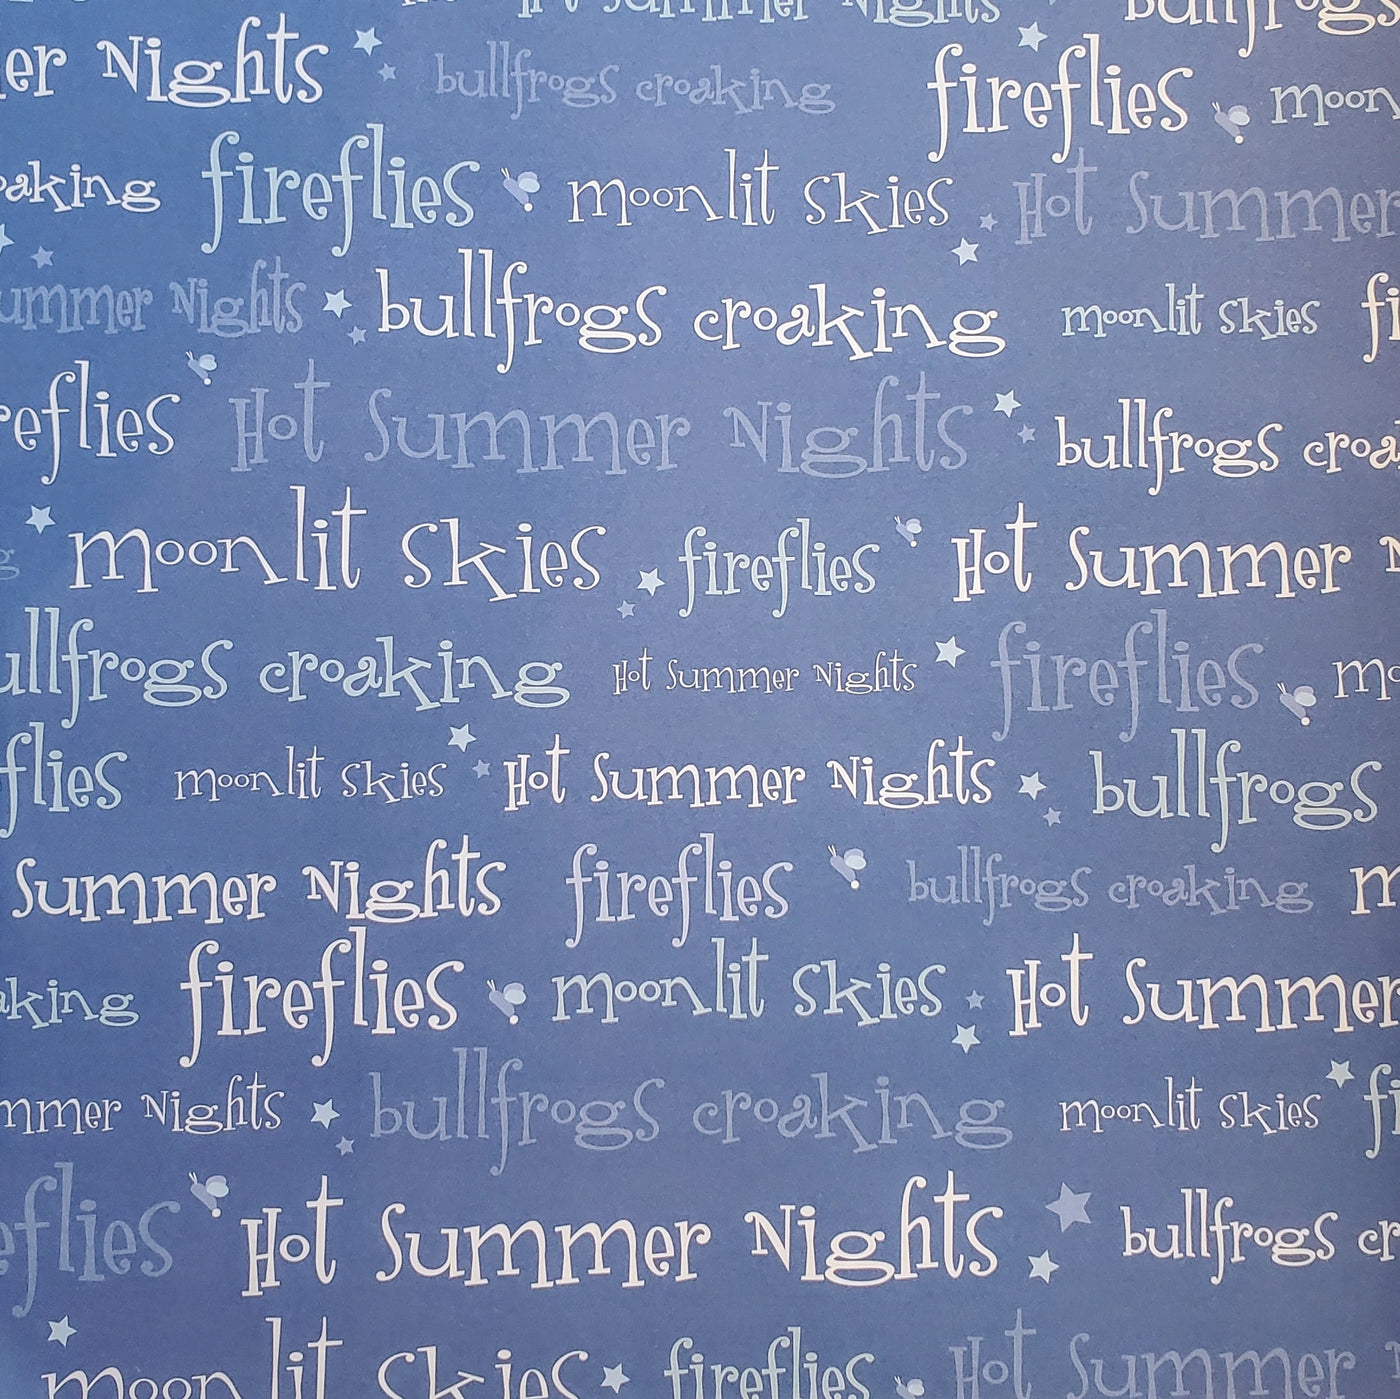 12x12 lightweight single sided patterned paper with summer night phrases on a blue background. Archival quality paper from DCWV.